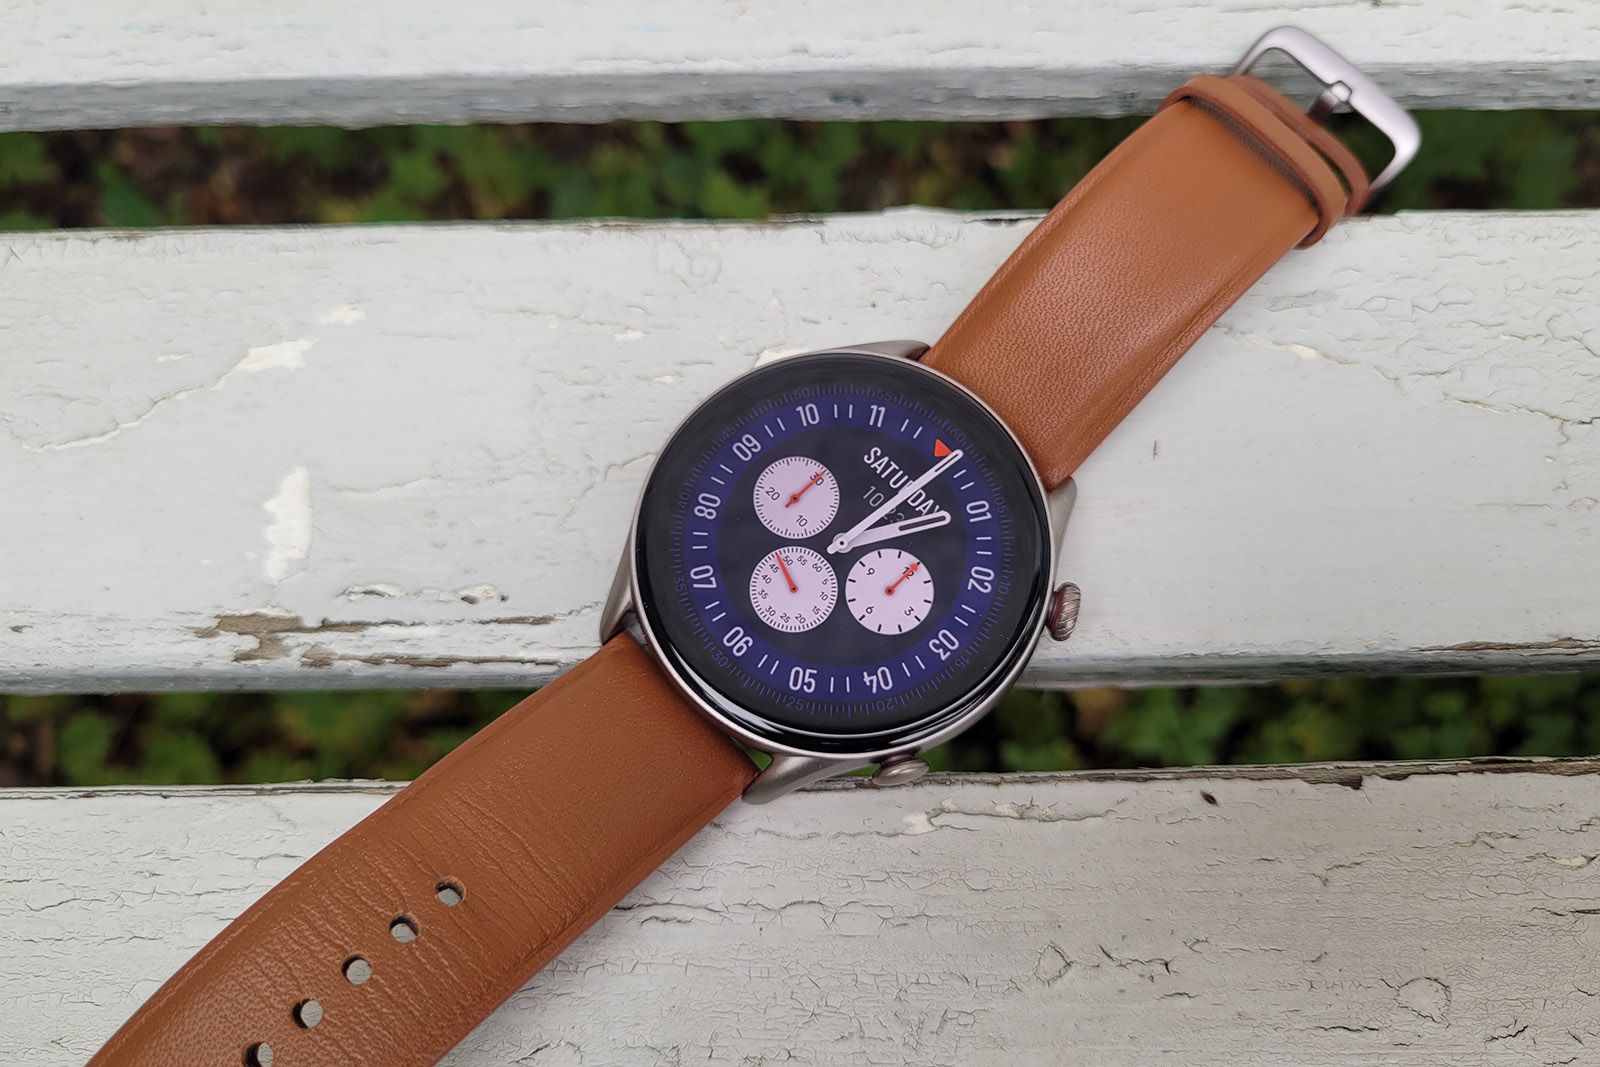 Amazfit GTR 3 Pro Review: Stunning Design Meets Capable Software